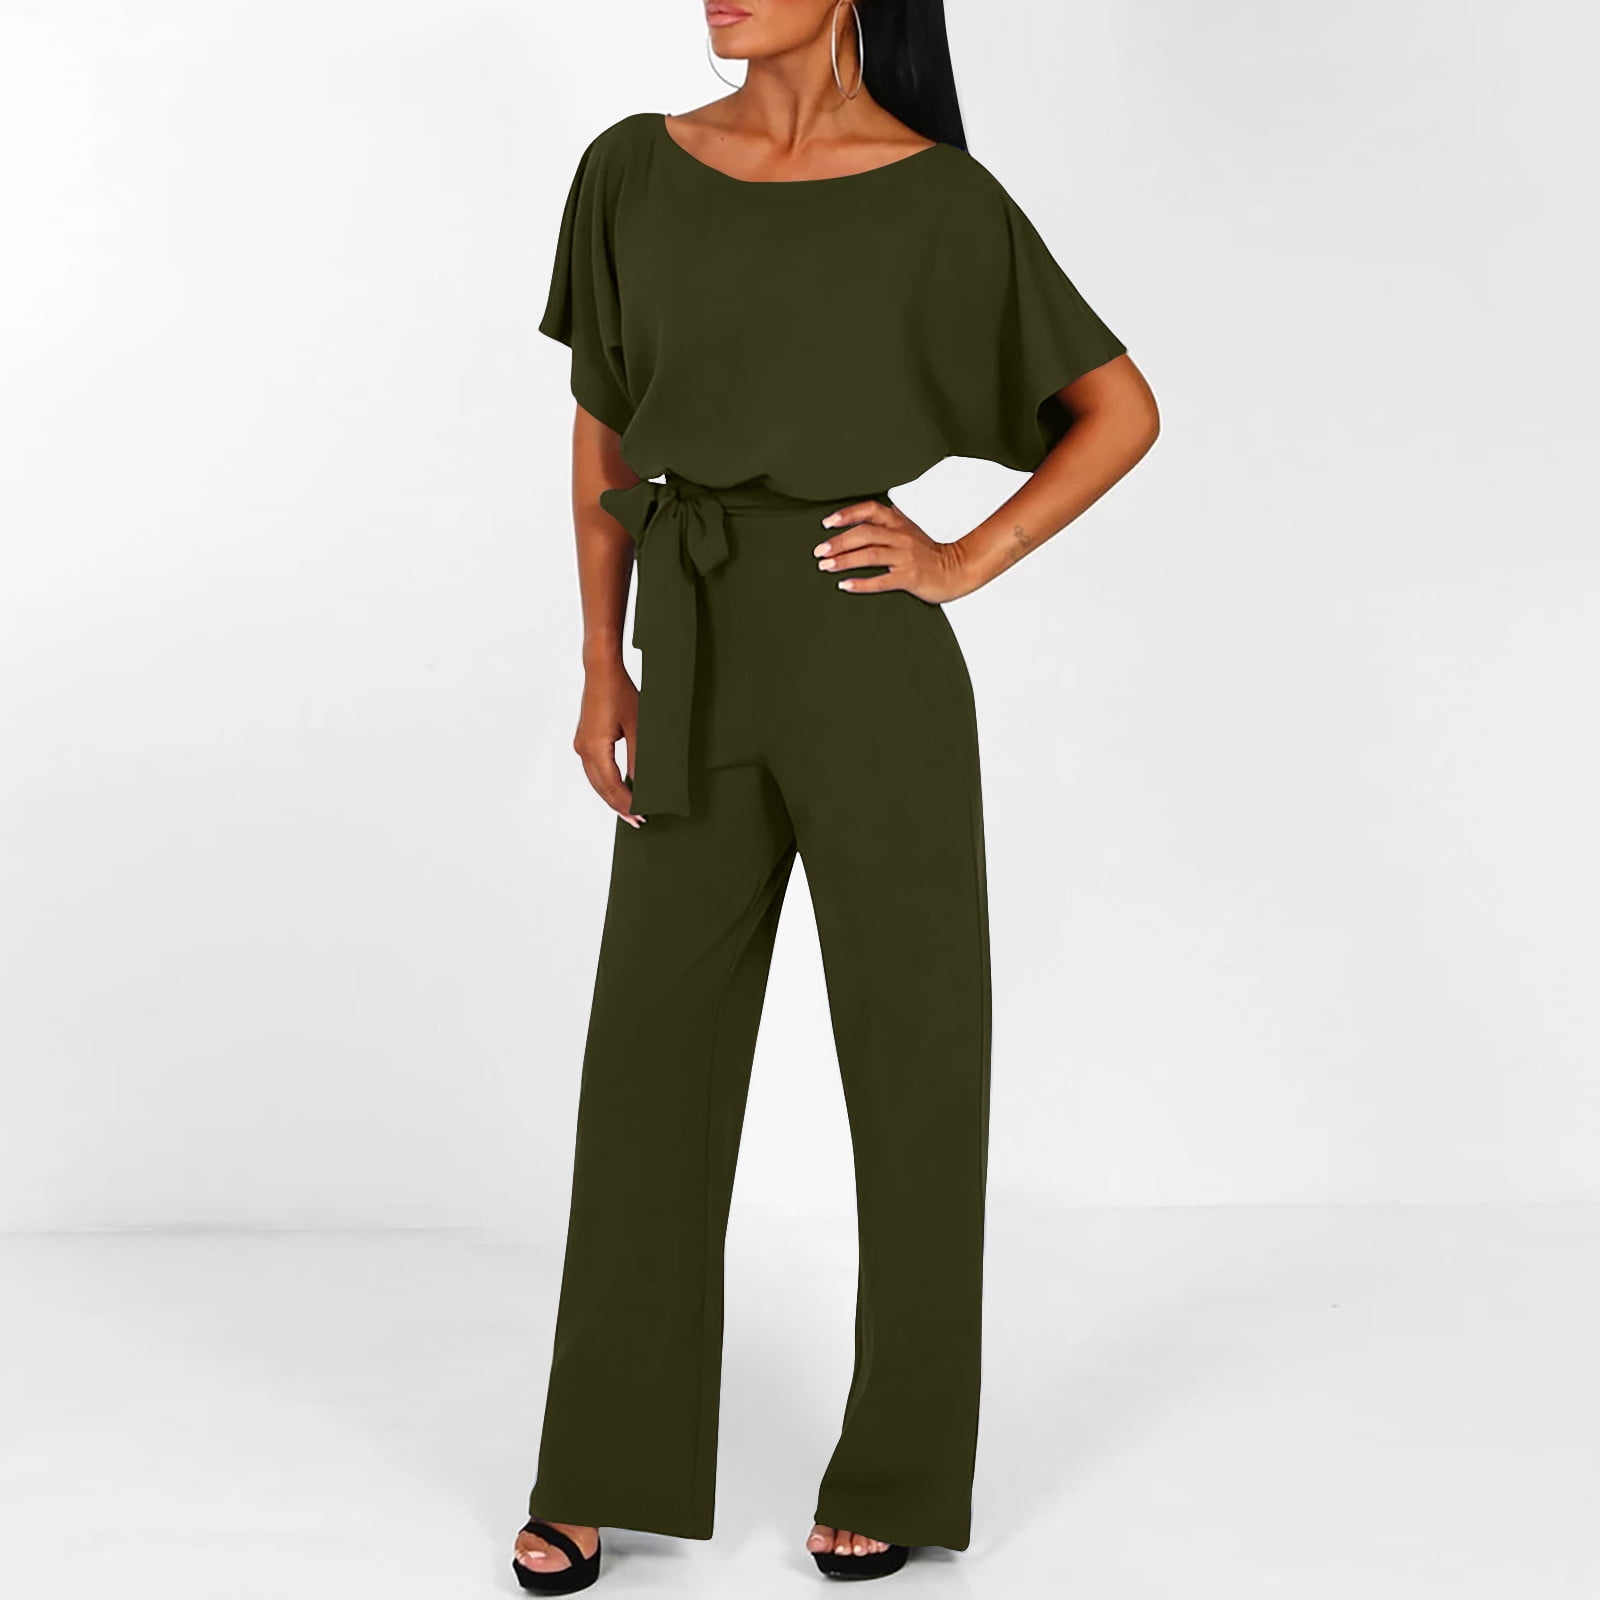 Gaecuw Jumpsuits for Women Dressy Short Sleeve Overall Square Neck Band  Collar Solid Onesie Strappy One Piece Outfits Casual Adjustable Loose Baggy  Long Pants Wide Leg Linen Summer Romper Ankle Length 